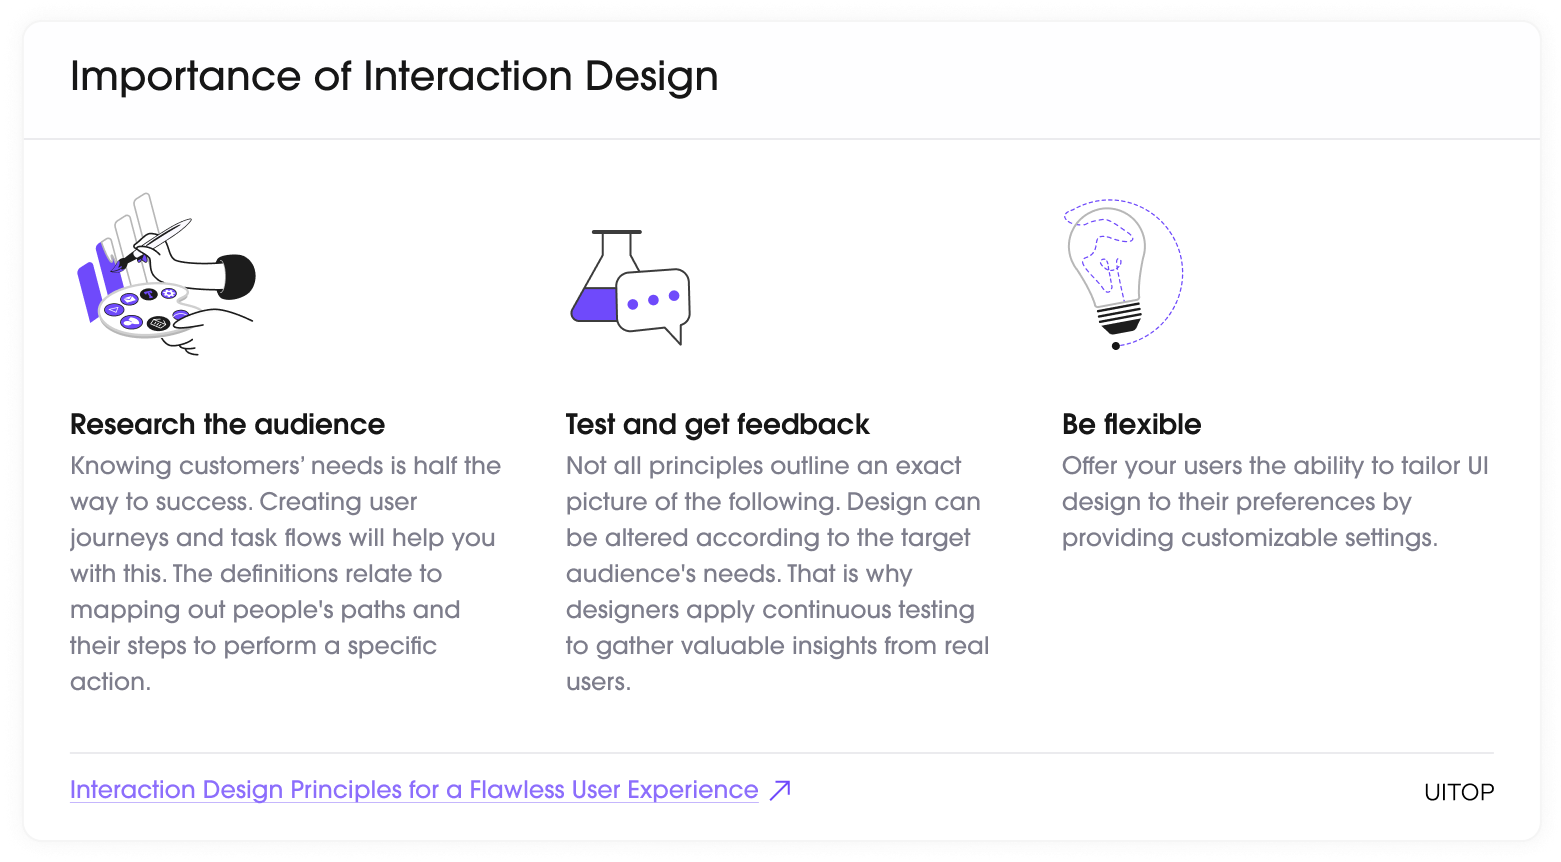 Importance of Interaction Design